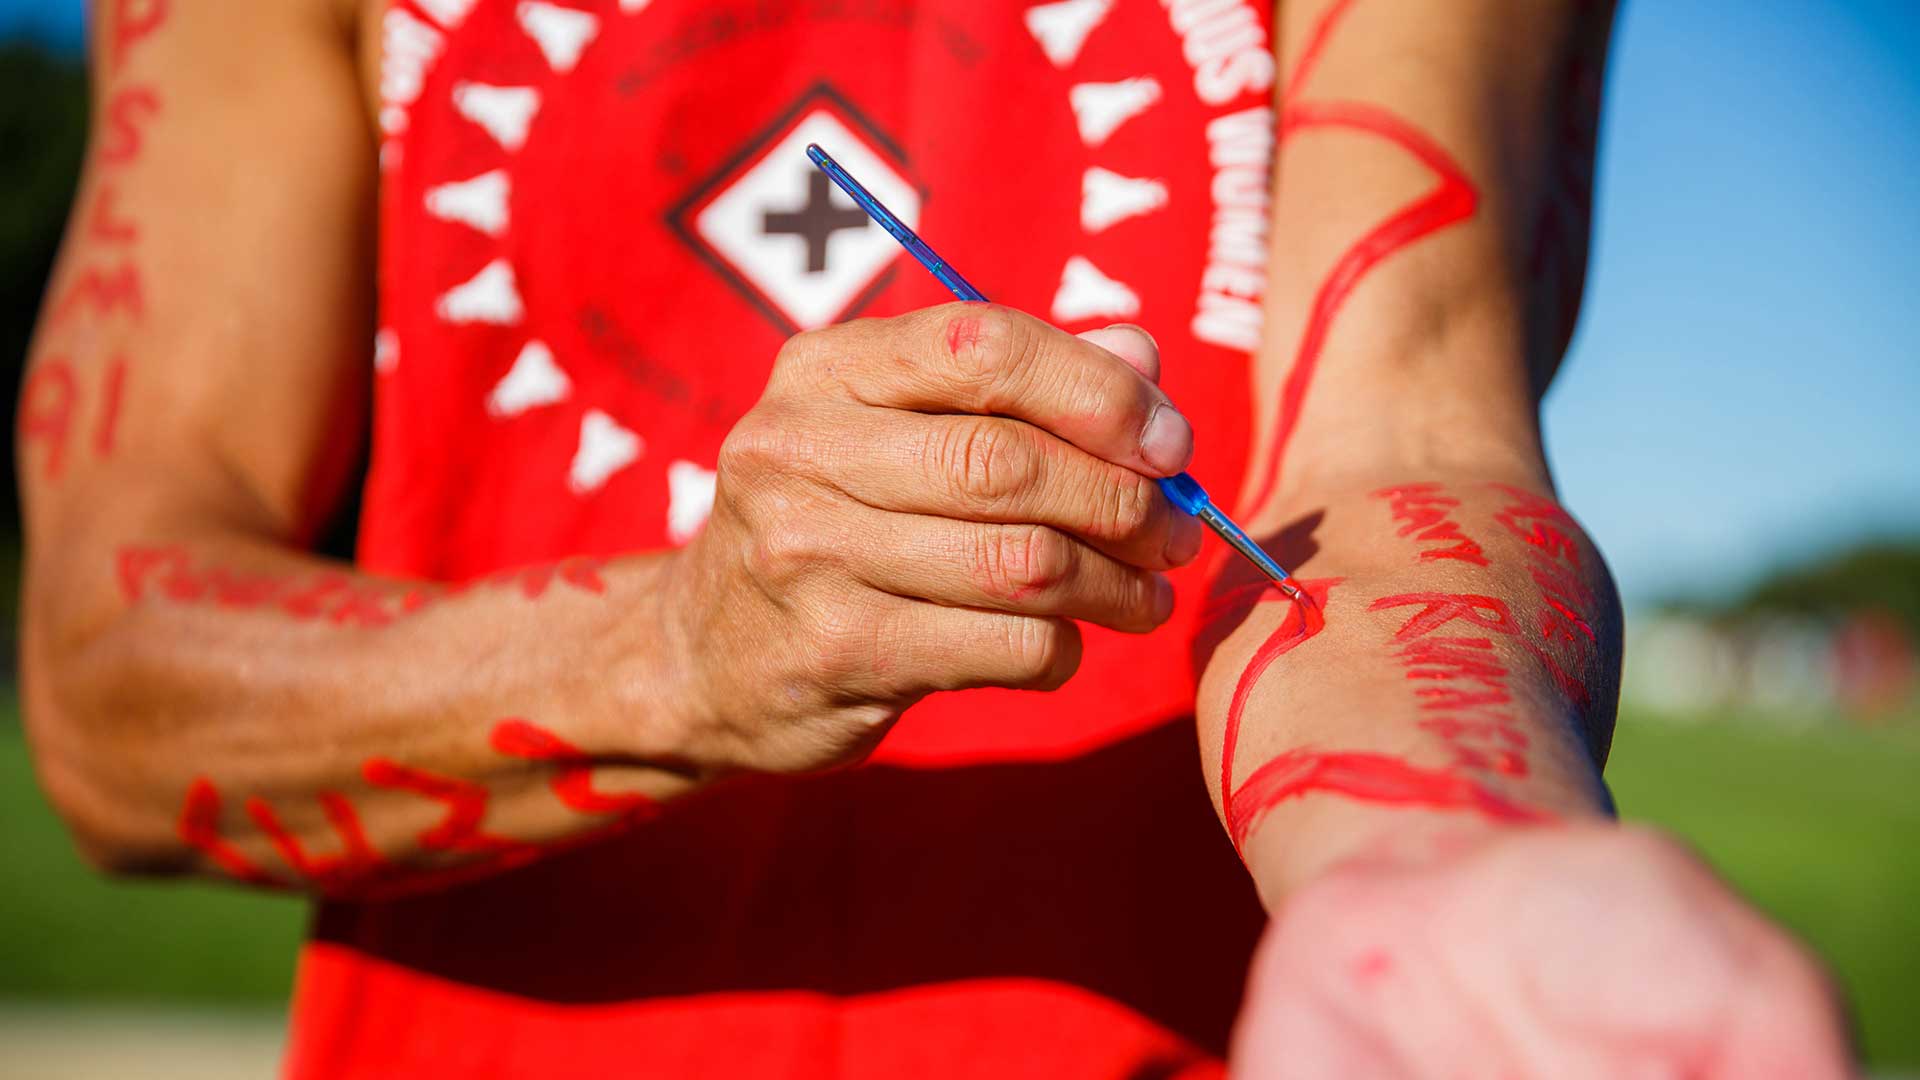 Duane Garvais-Lawrence paints the name of a missing Indigenous woman on his arm before starting a run around the National Mall in Washington, D.C., during the final stop in 2021 for the MMIW Bike Run USA to raise awareness of the issue of missing and murdered Indigenous women.